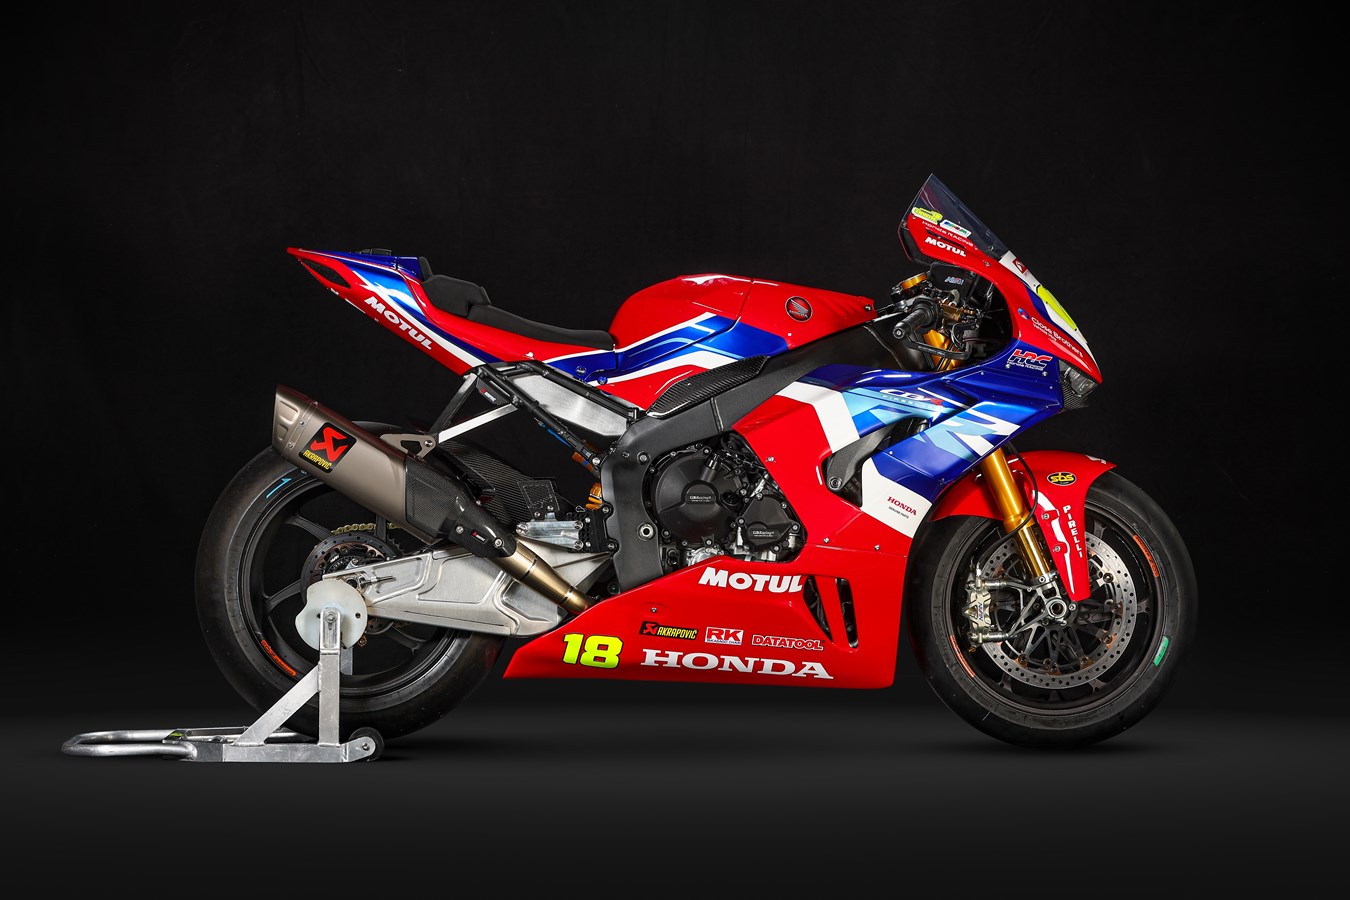 Honda Racing UK unveils its new livery for the 2023 racing season